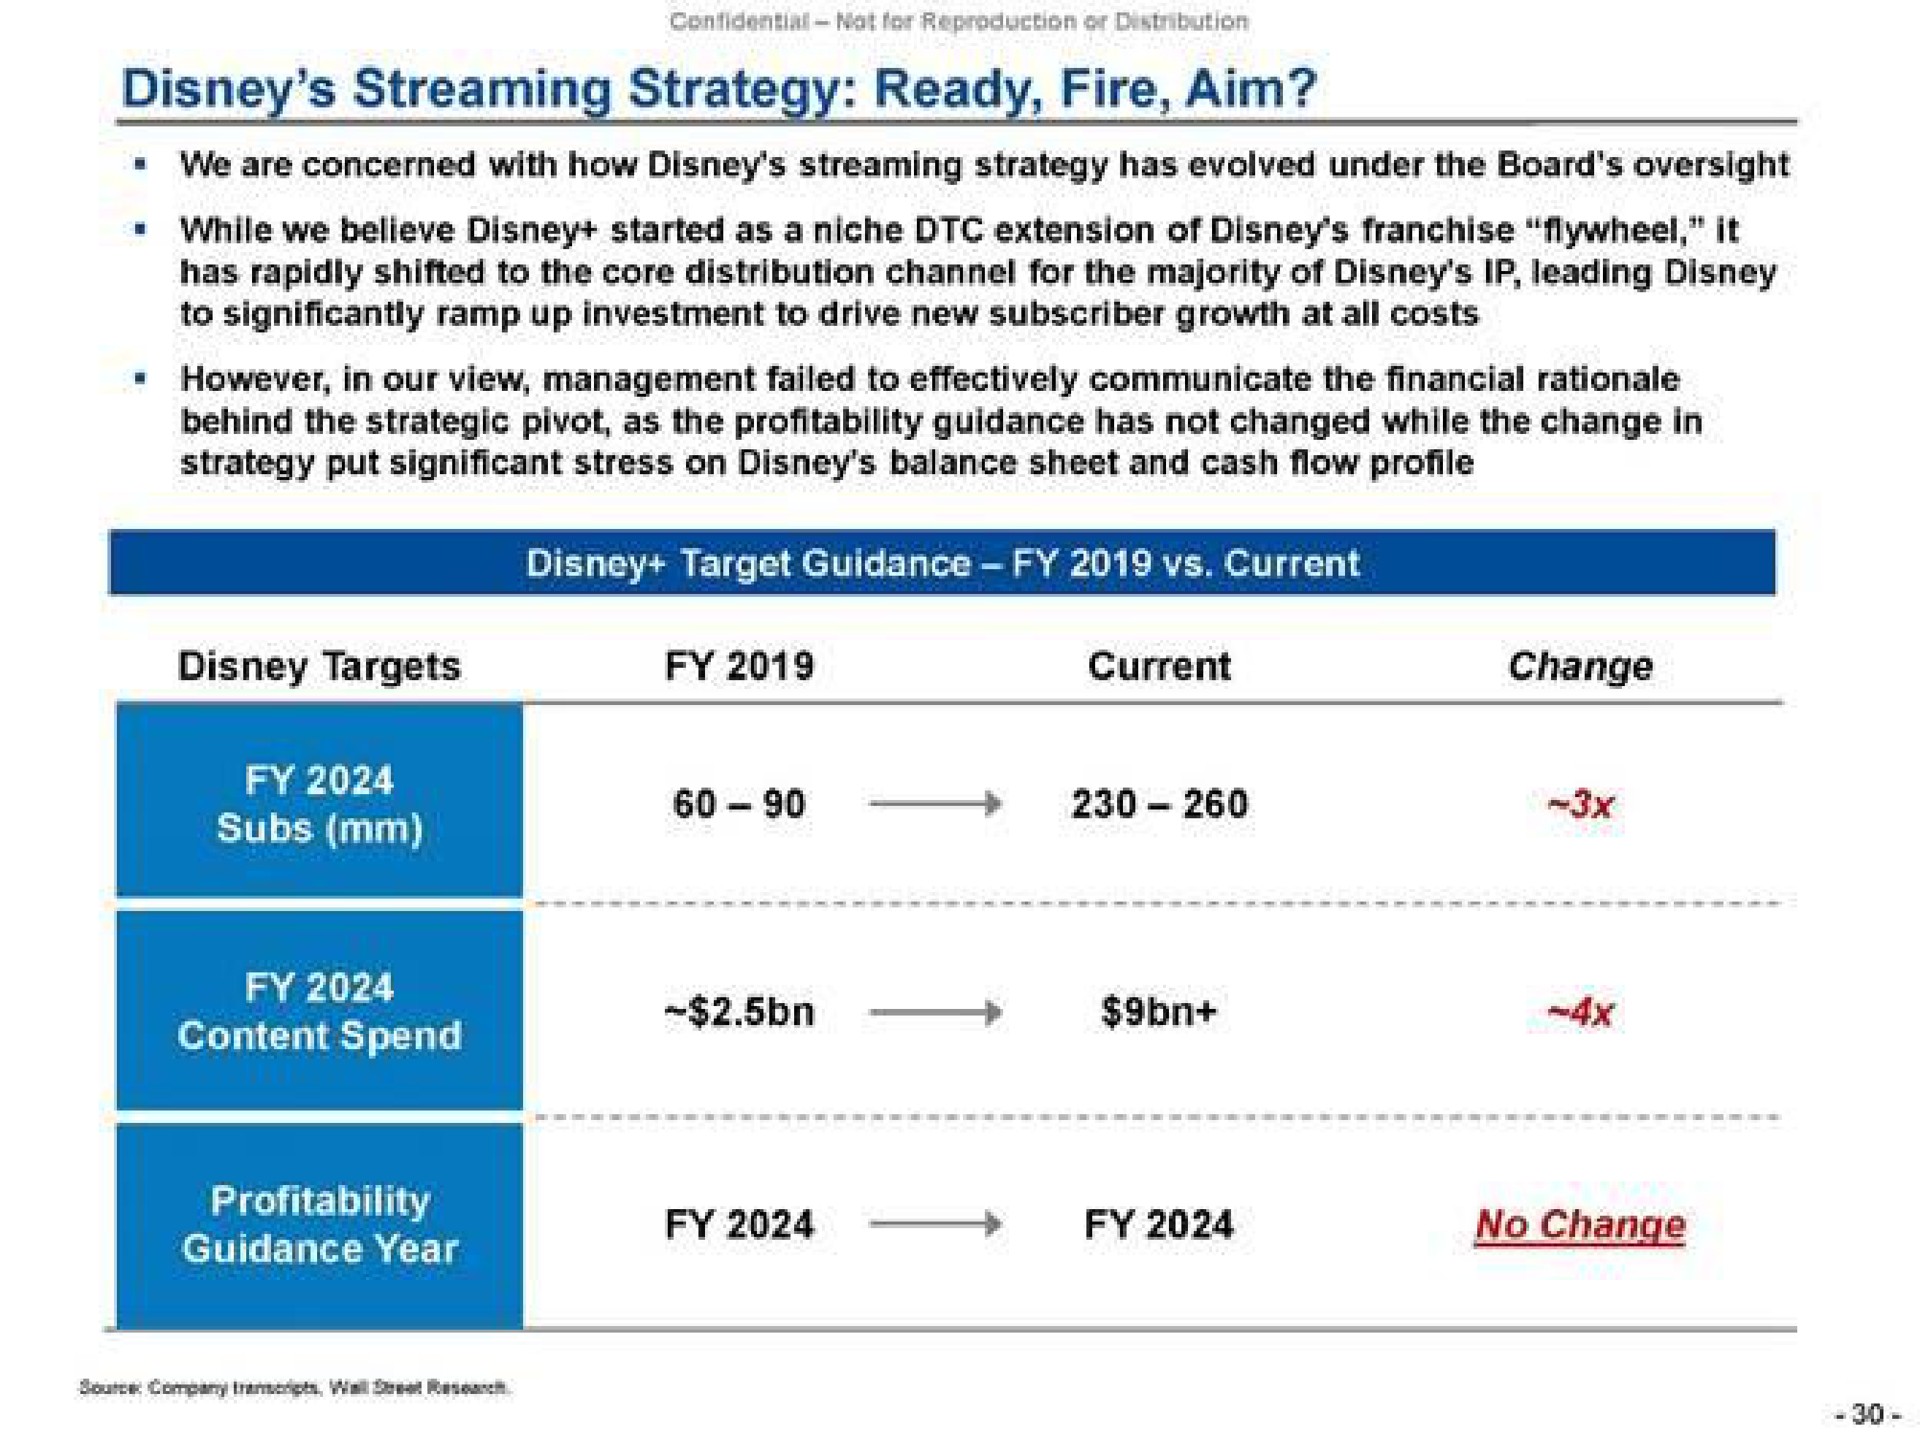 streaming strategy ready fire aim we are concerned with how streaming strategy has evolved under the board oversight while we believe started as a niche extension of franchise flywheel it has rapidly shifted to the core distribution channel for the majority of leading to significantly ramp up investment to drive new subscriber growth at all costs however in our view management failed to effectively communicate the financial rationale behind the strategic pivot as the profitability guidance has not changed while the change in strategy put significant stress on balance sheet and cash flow profile target guidance current targets current change subs no change he mange | Trian Partners